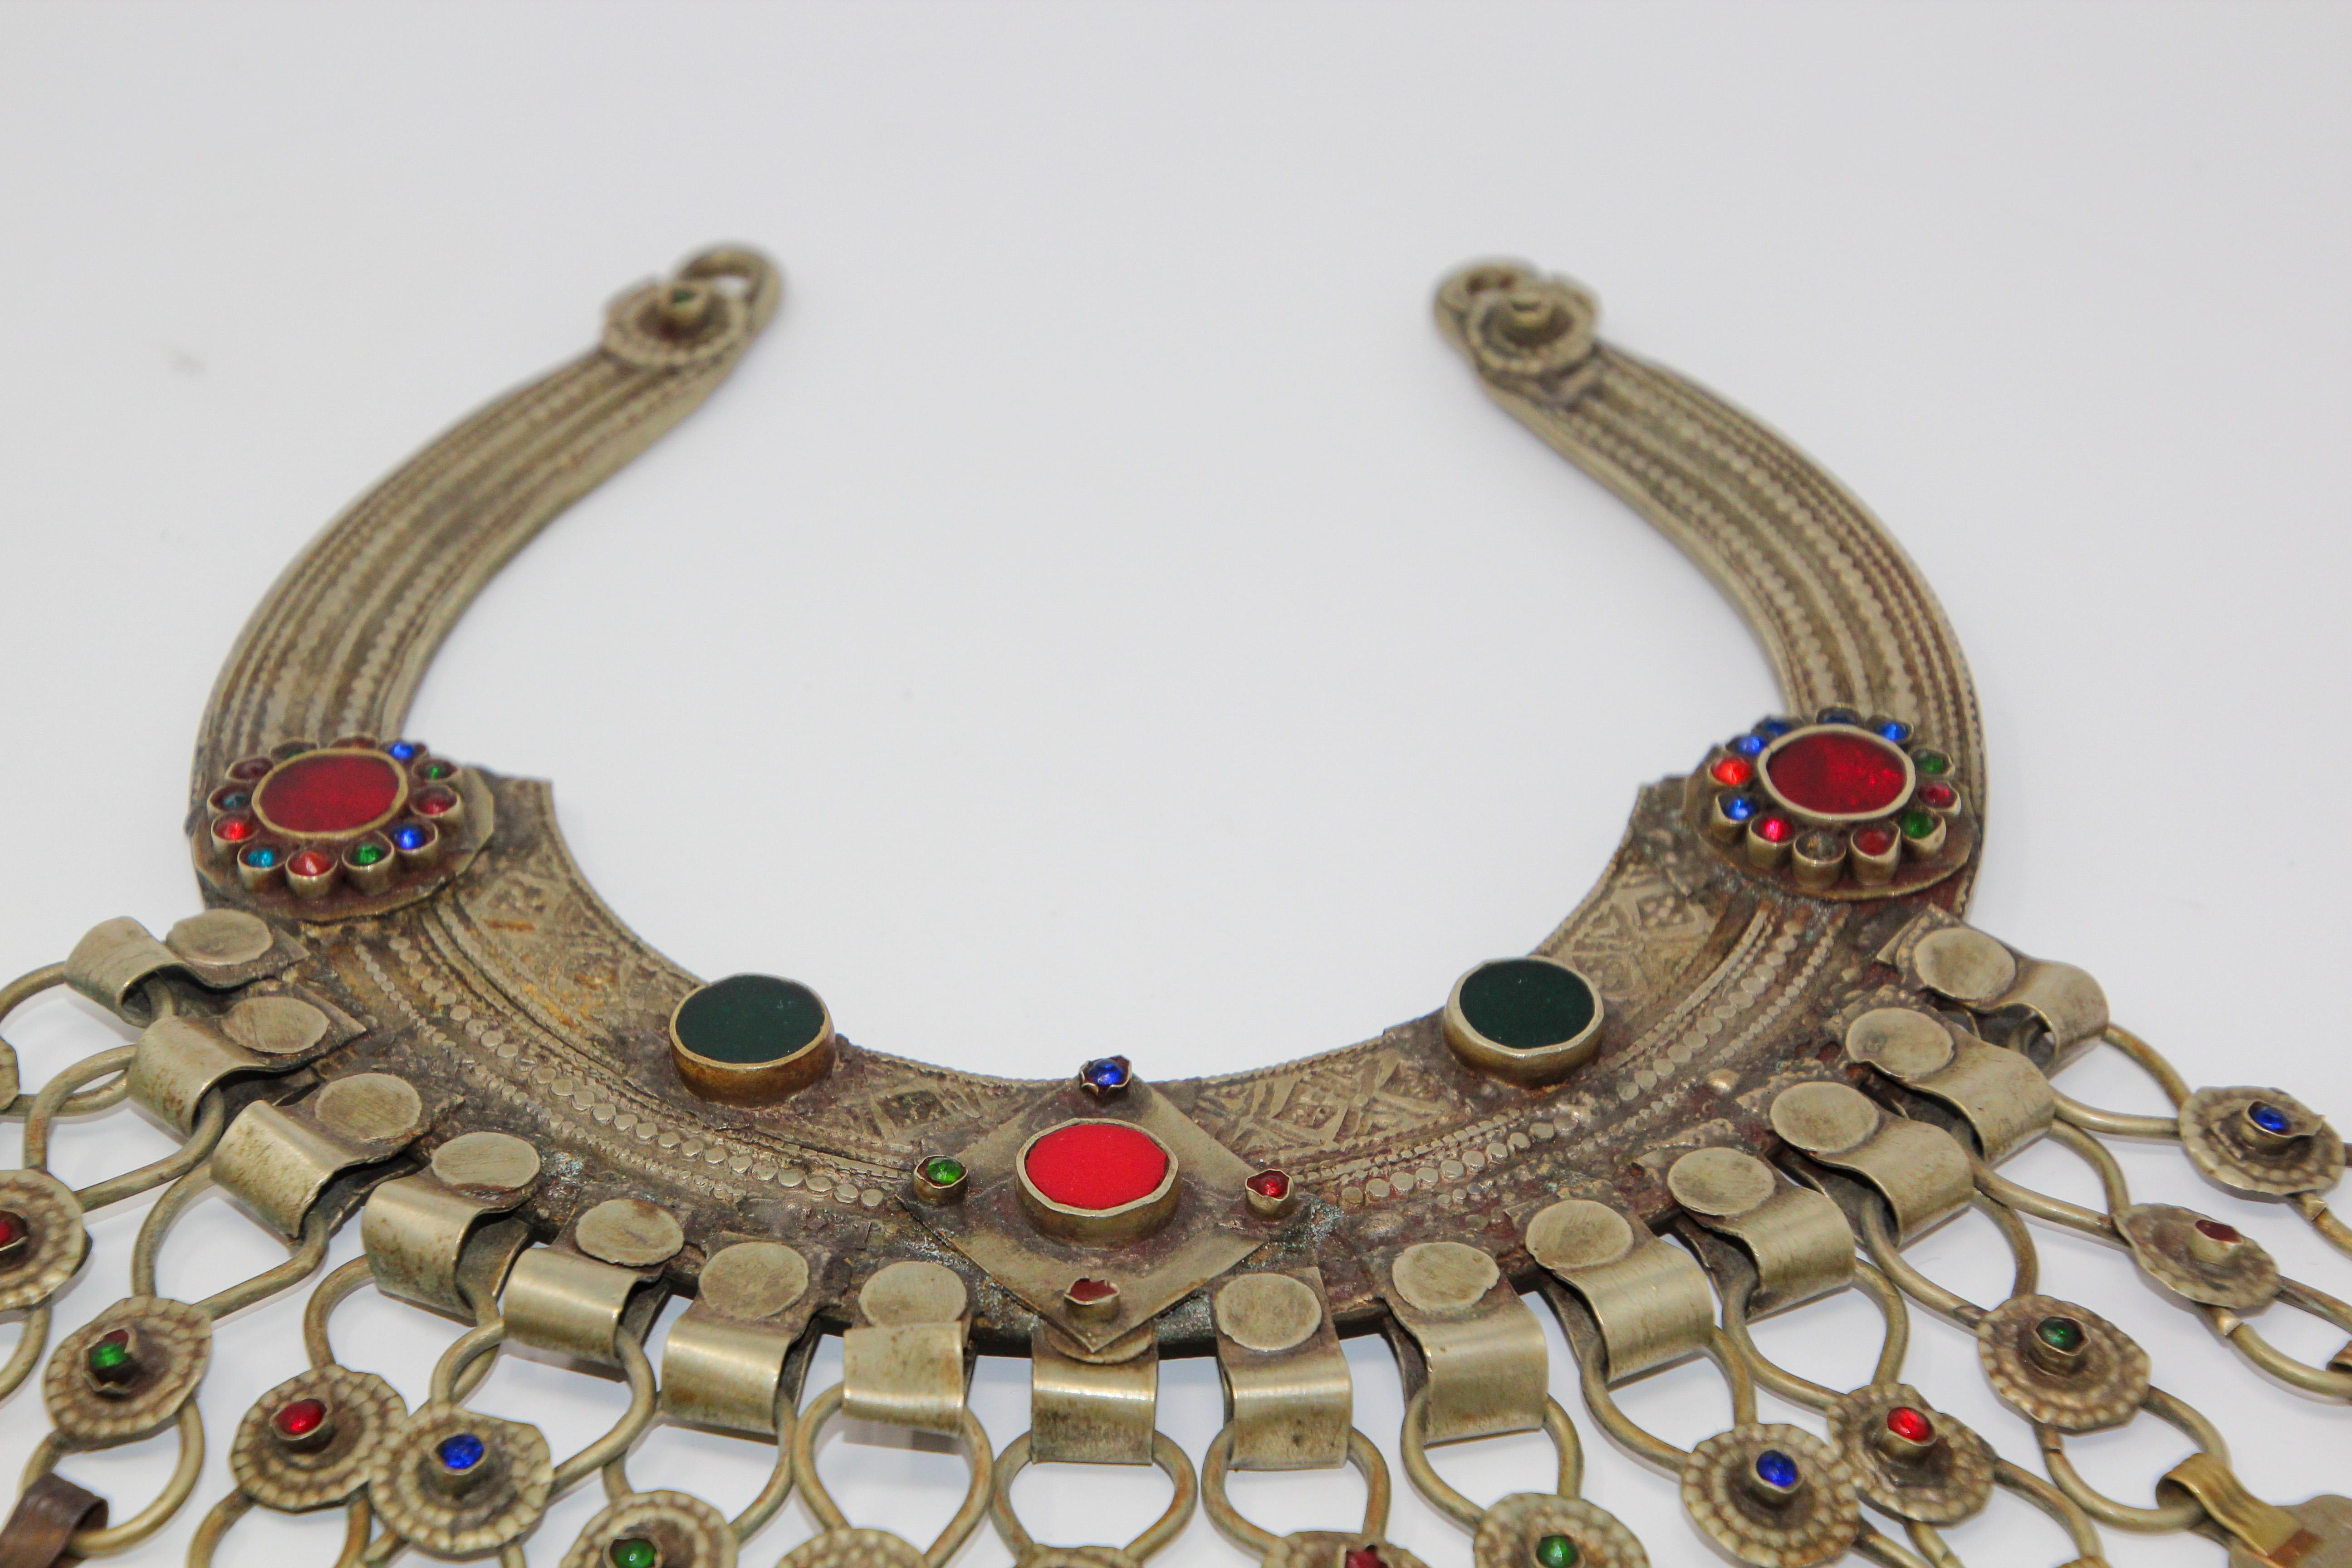 A Moroccan Tribal jewelry vintage chocker inlaid with colorful glass beads in red and green and dangling coins. 
German silver, but not of the standard of sterling and richly embellished with applied silver designs and filigree.
Chocker size: 10